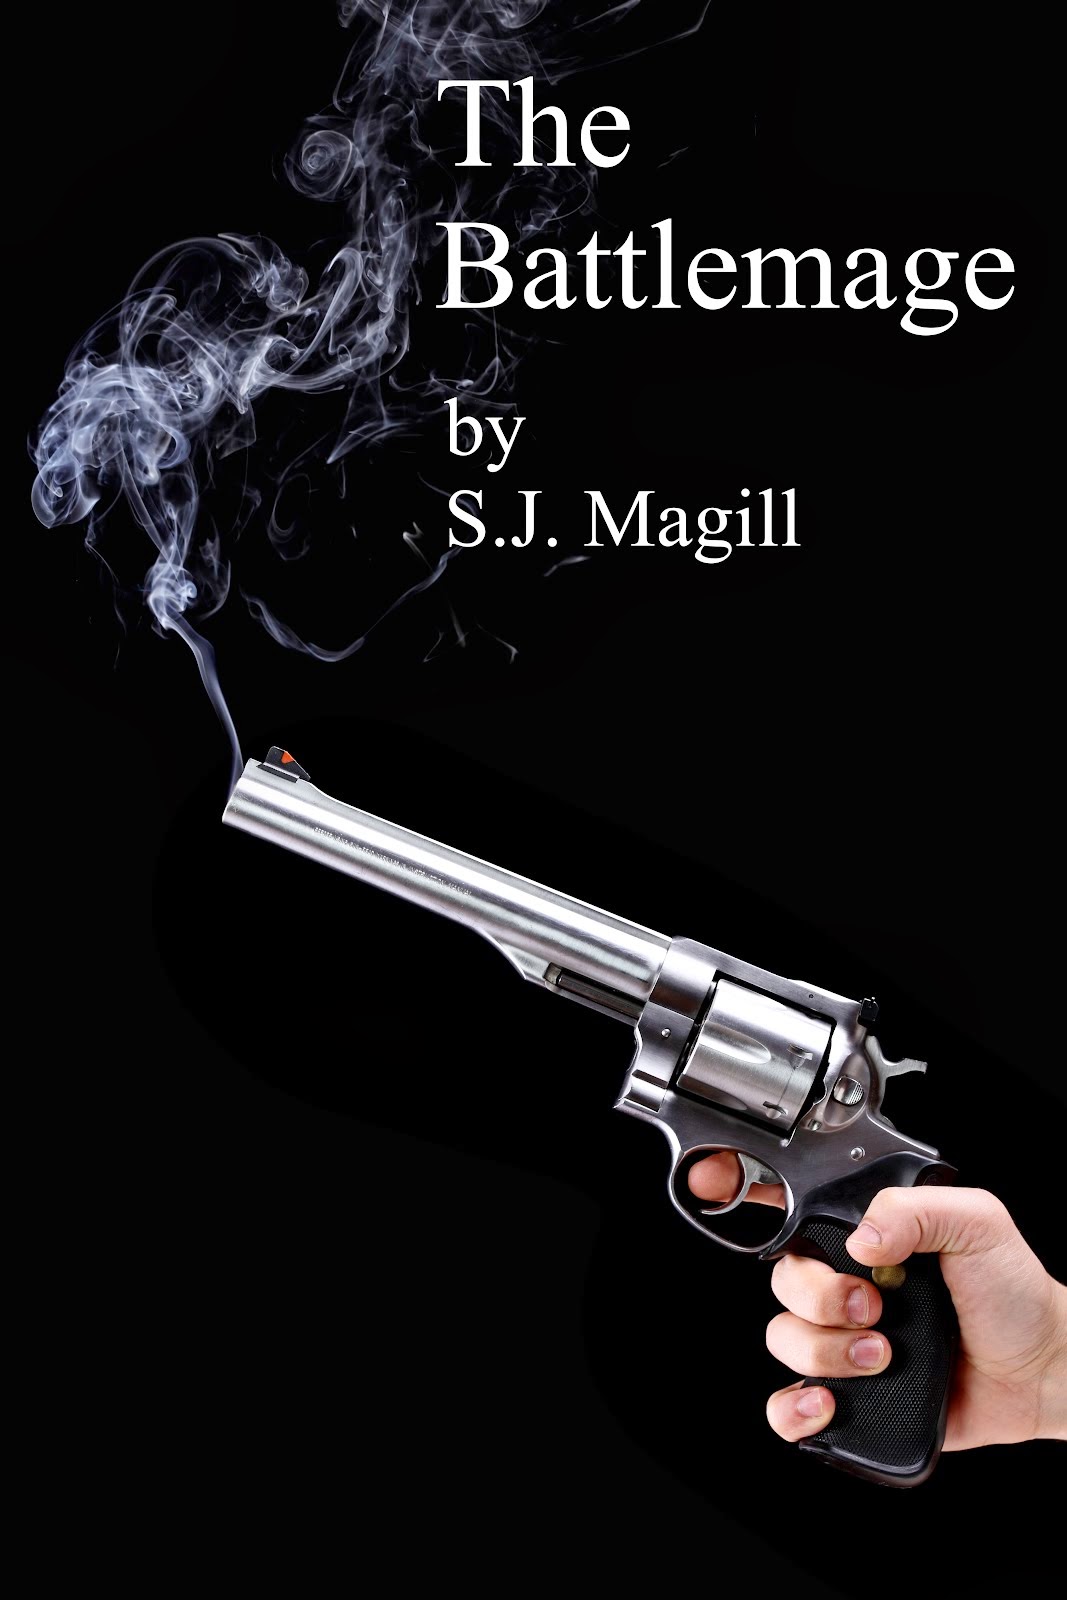 The Battlemage (Link to Amazon.com)